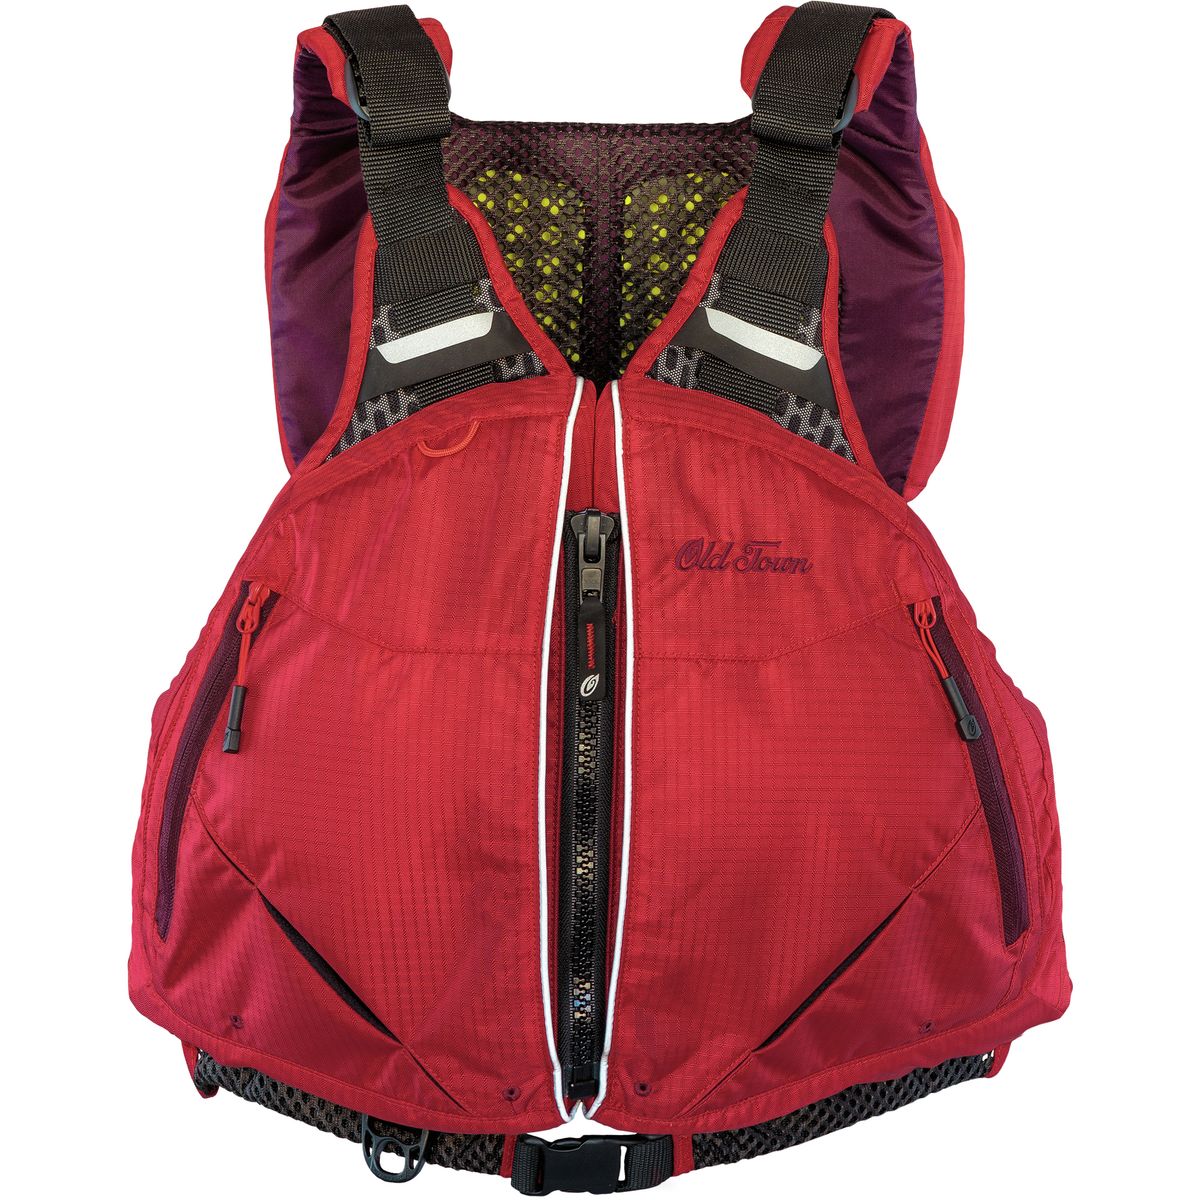 Old Town Solitude Personal Flotation Device - Men's